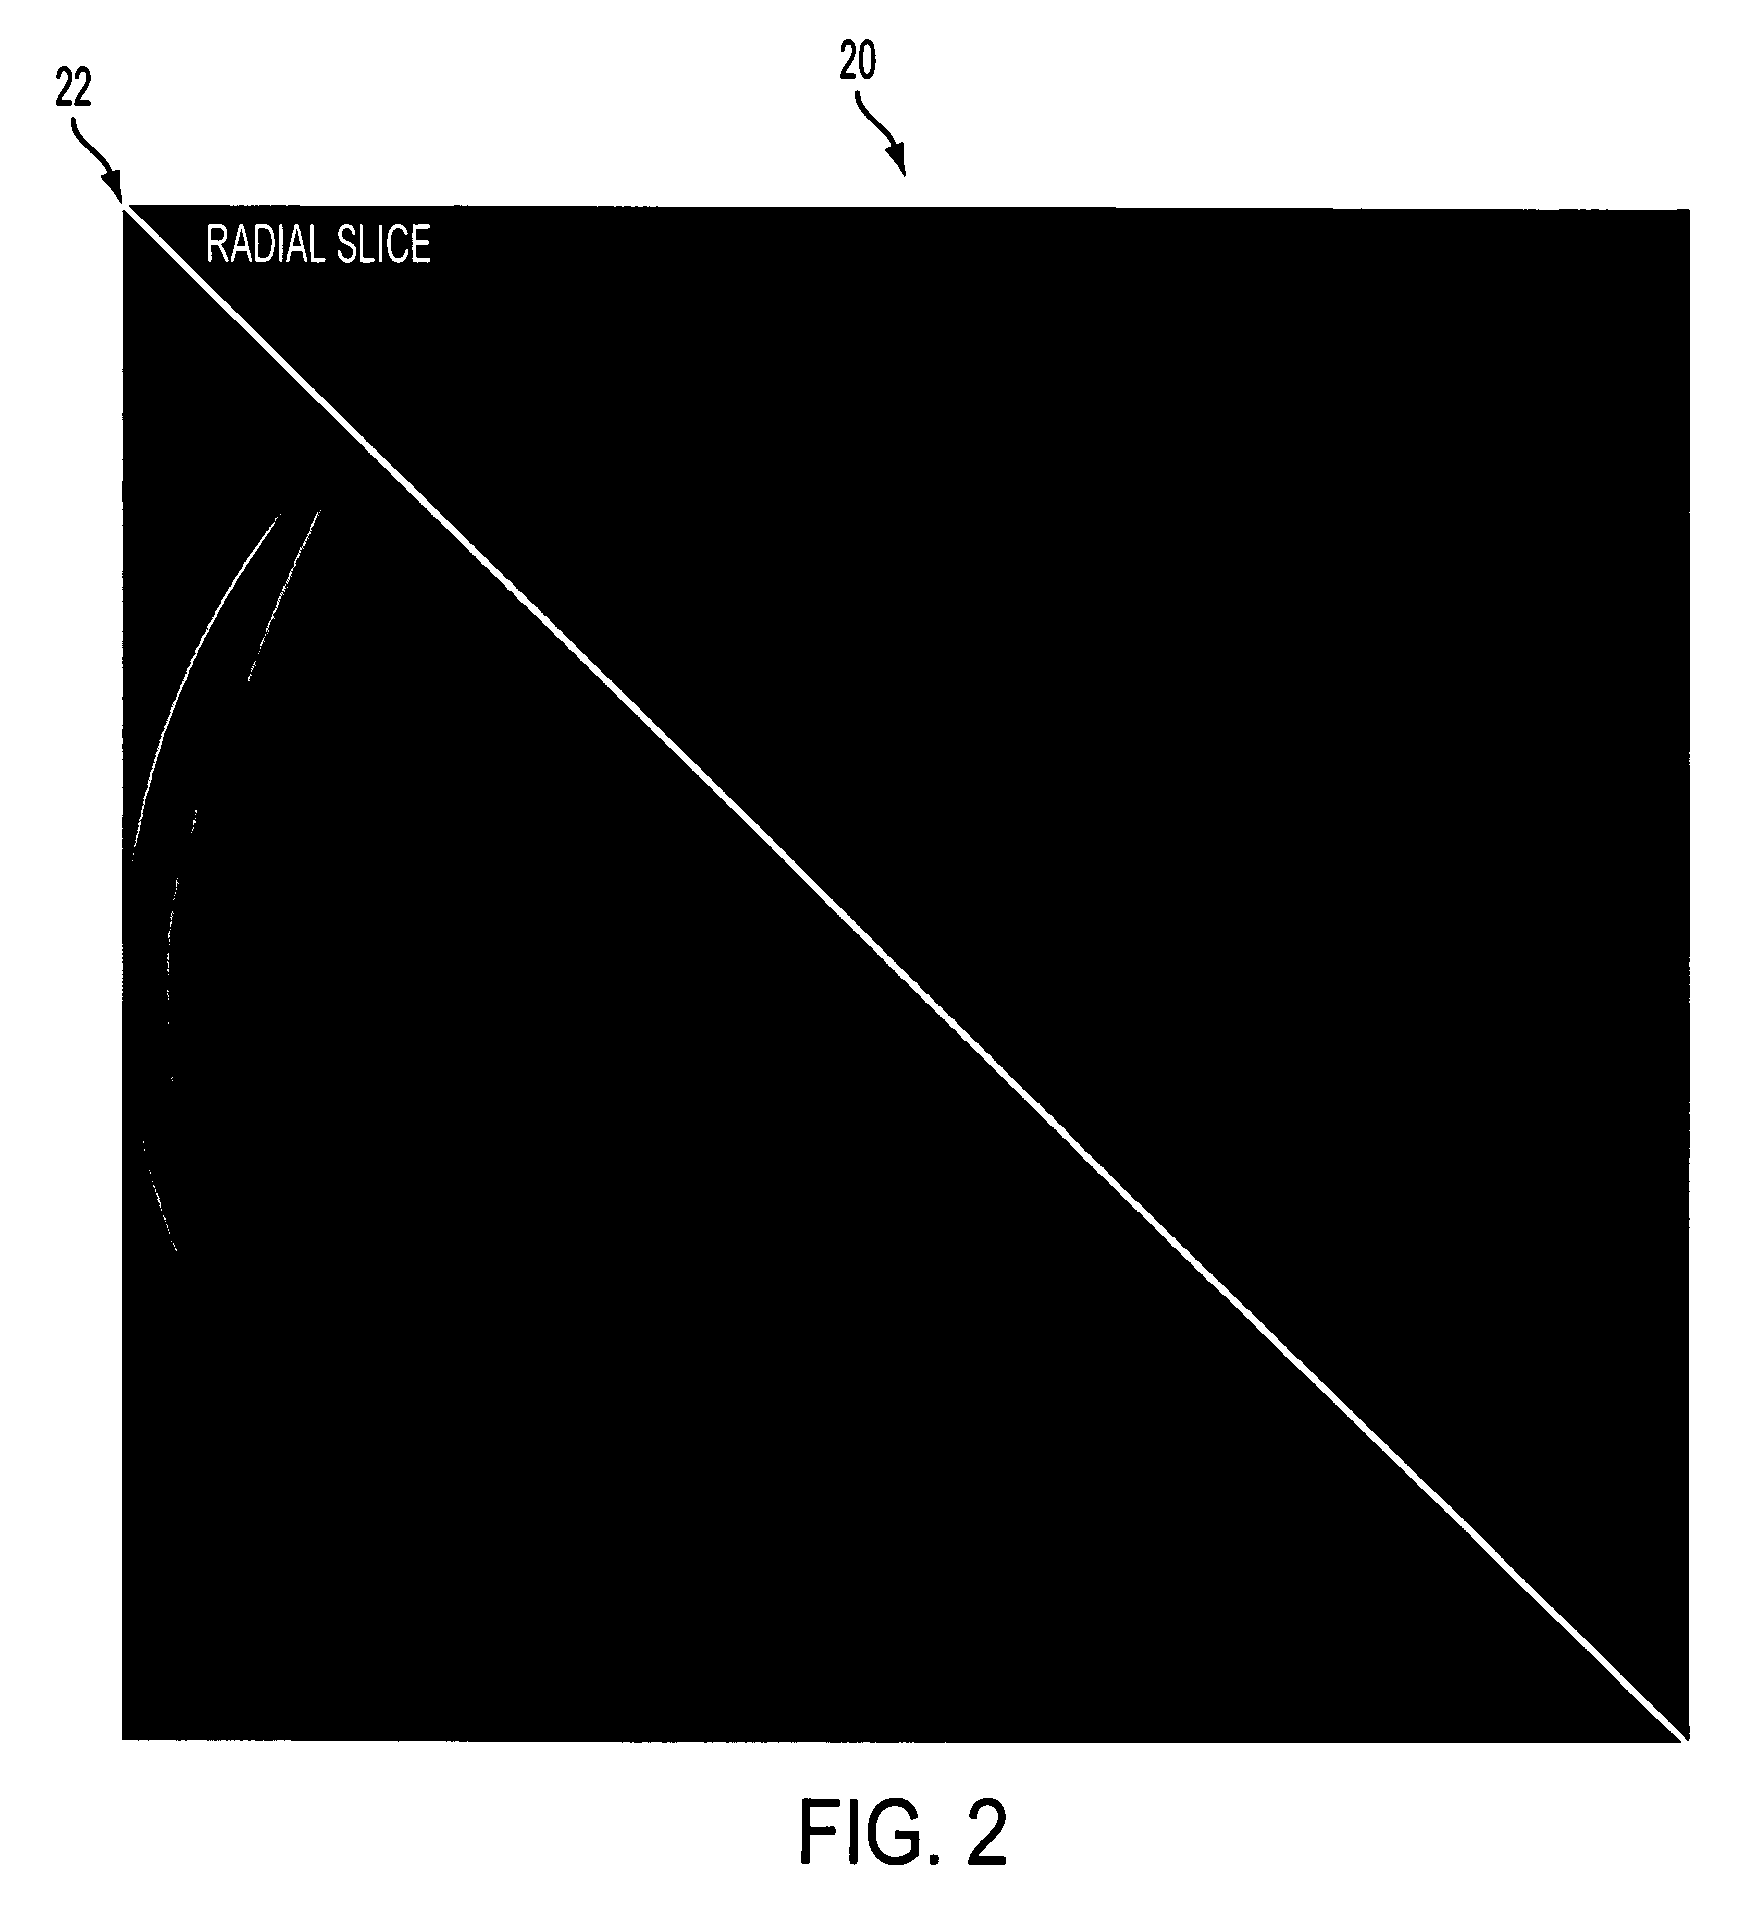 Catadioptric single camera systems having radial epipolar geometry and methods and means thereof